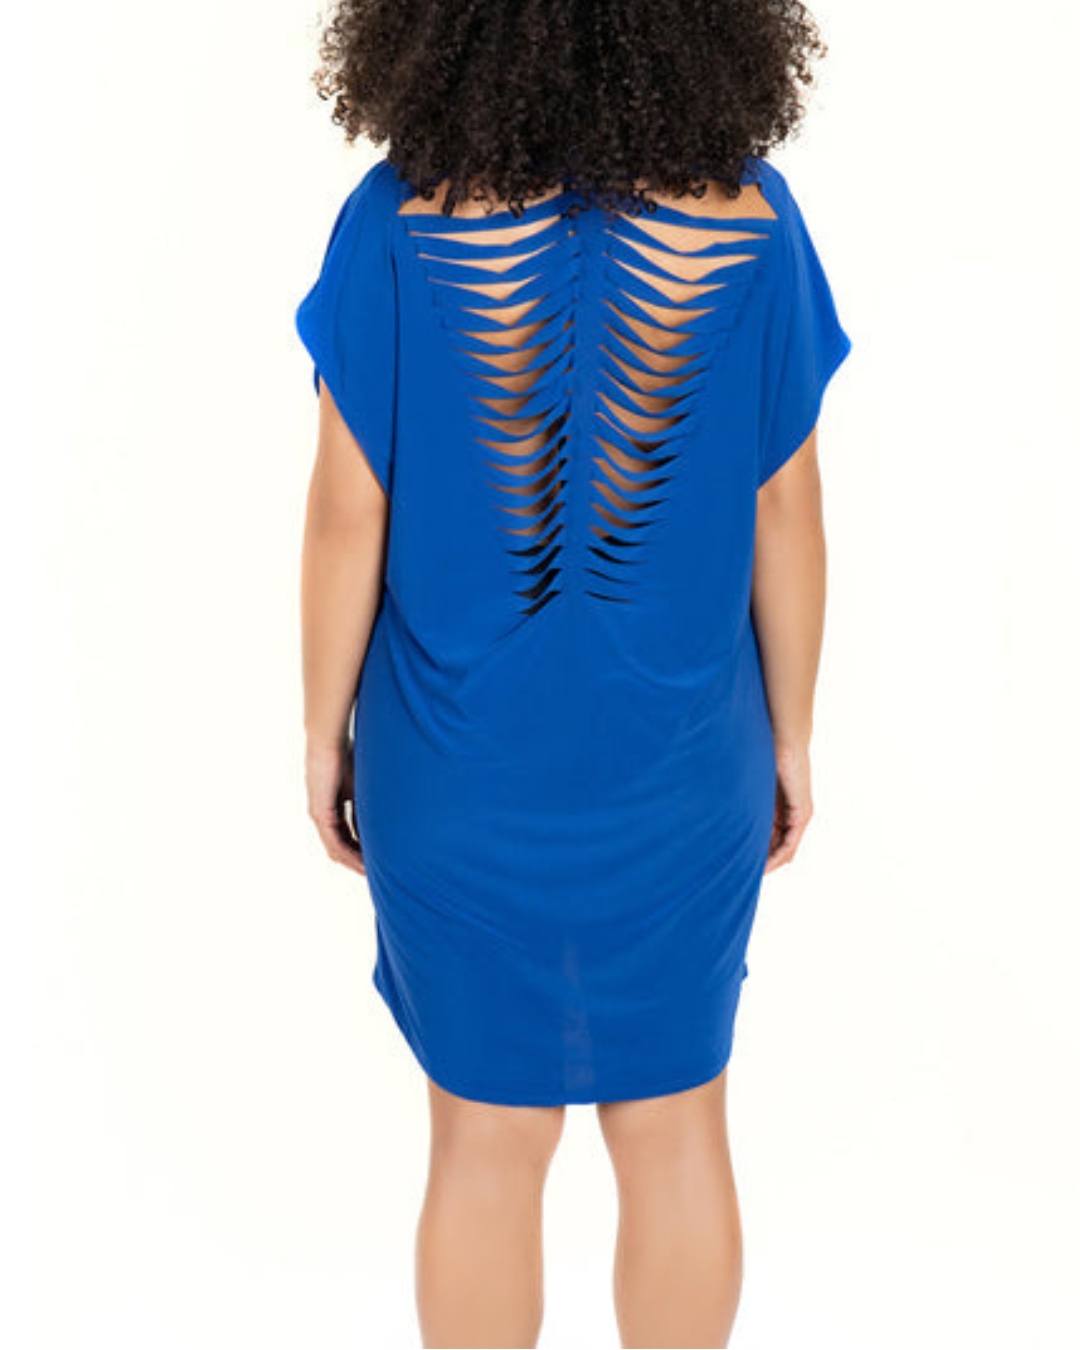 Model wearing a v neck tunic with a cut out back detail in royal blue